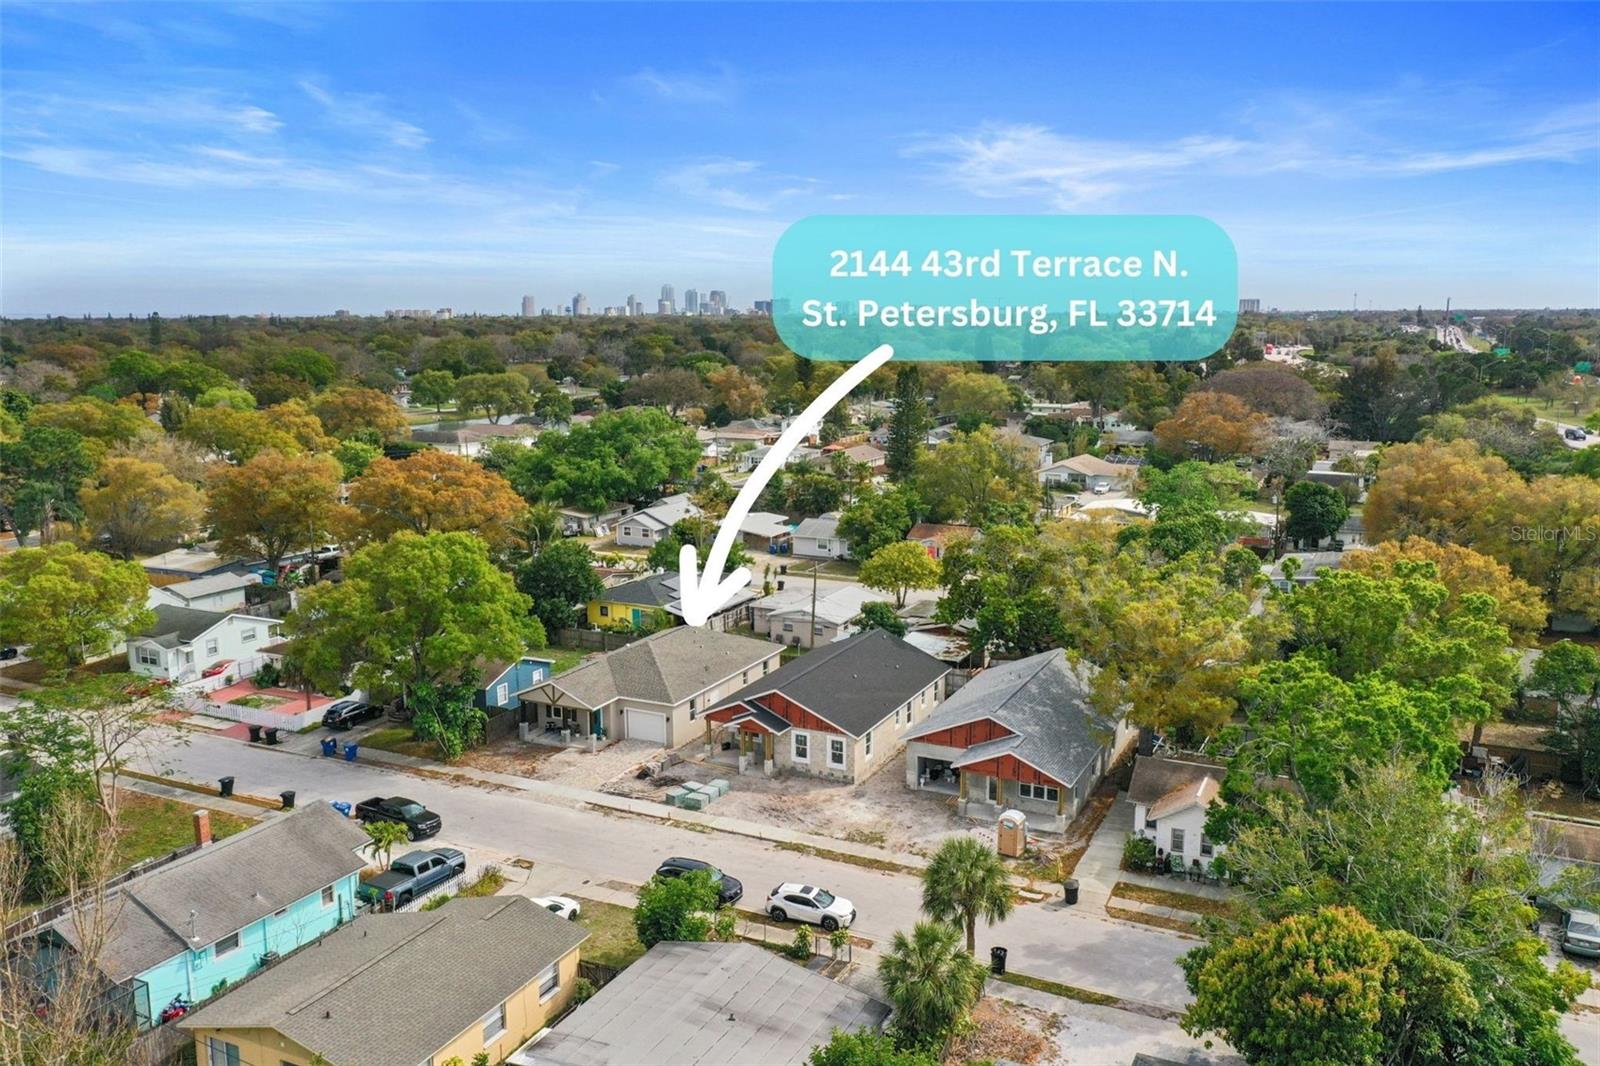 Drone view of 2144 43rd Terrace N